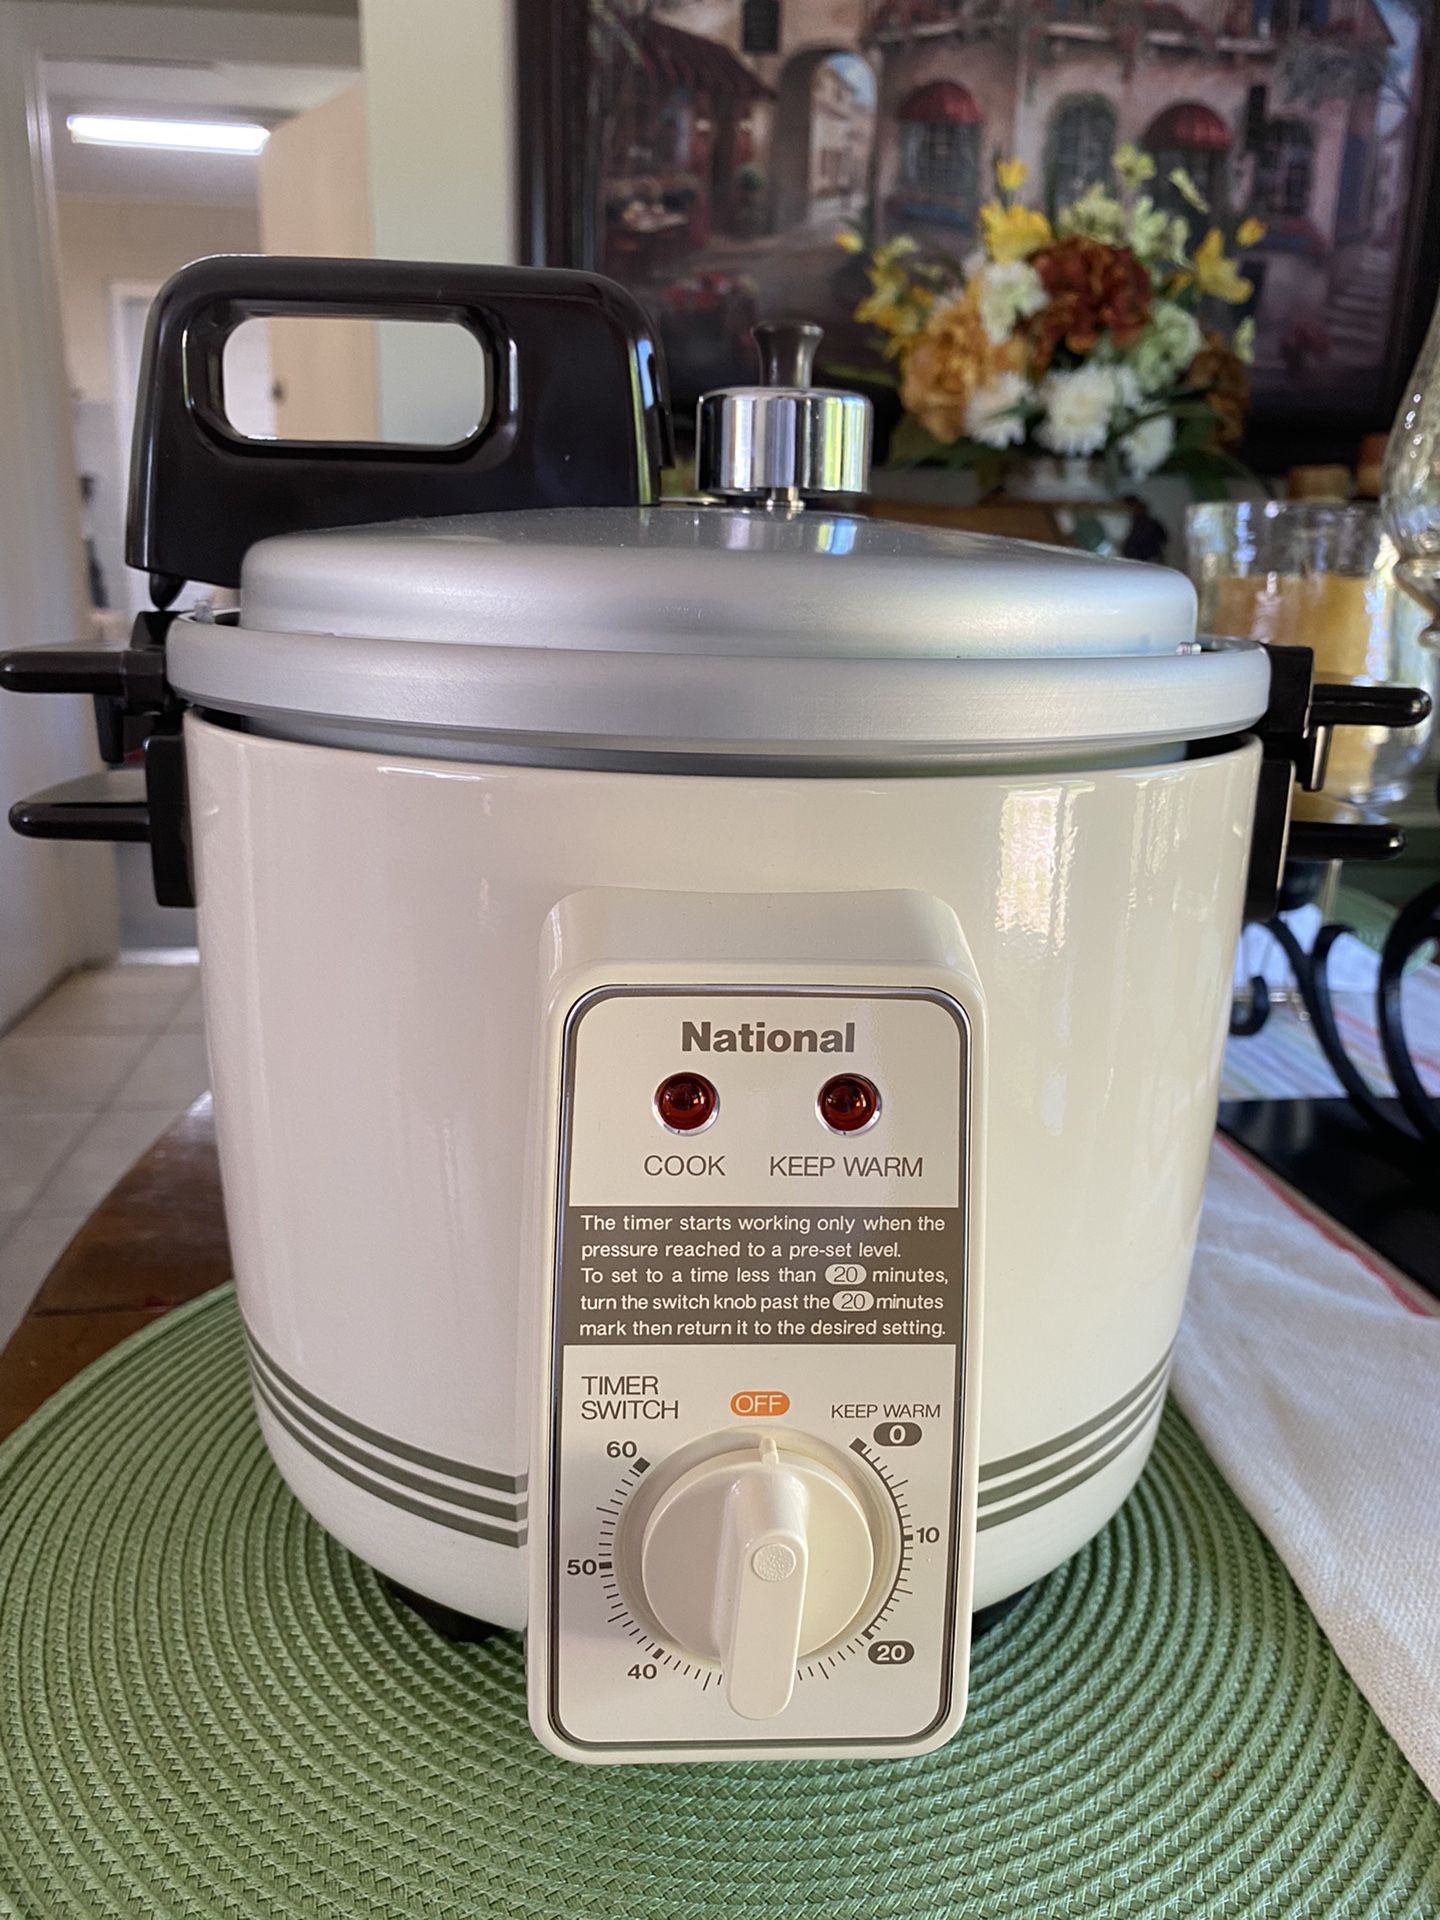 Oster Rice Cooker for Sale in Englewood, FL - OfferUp